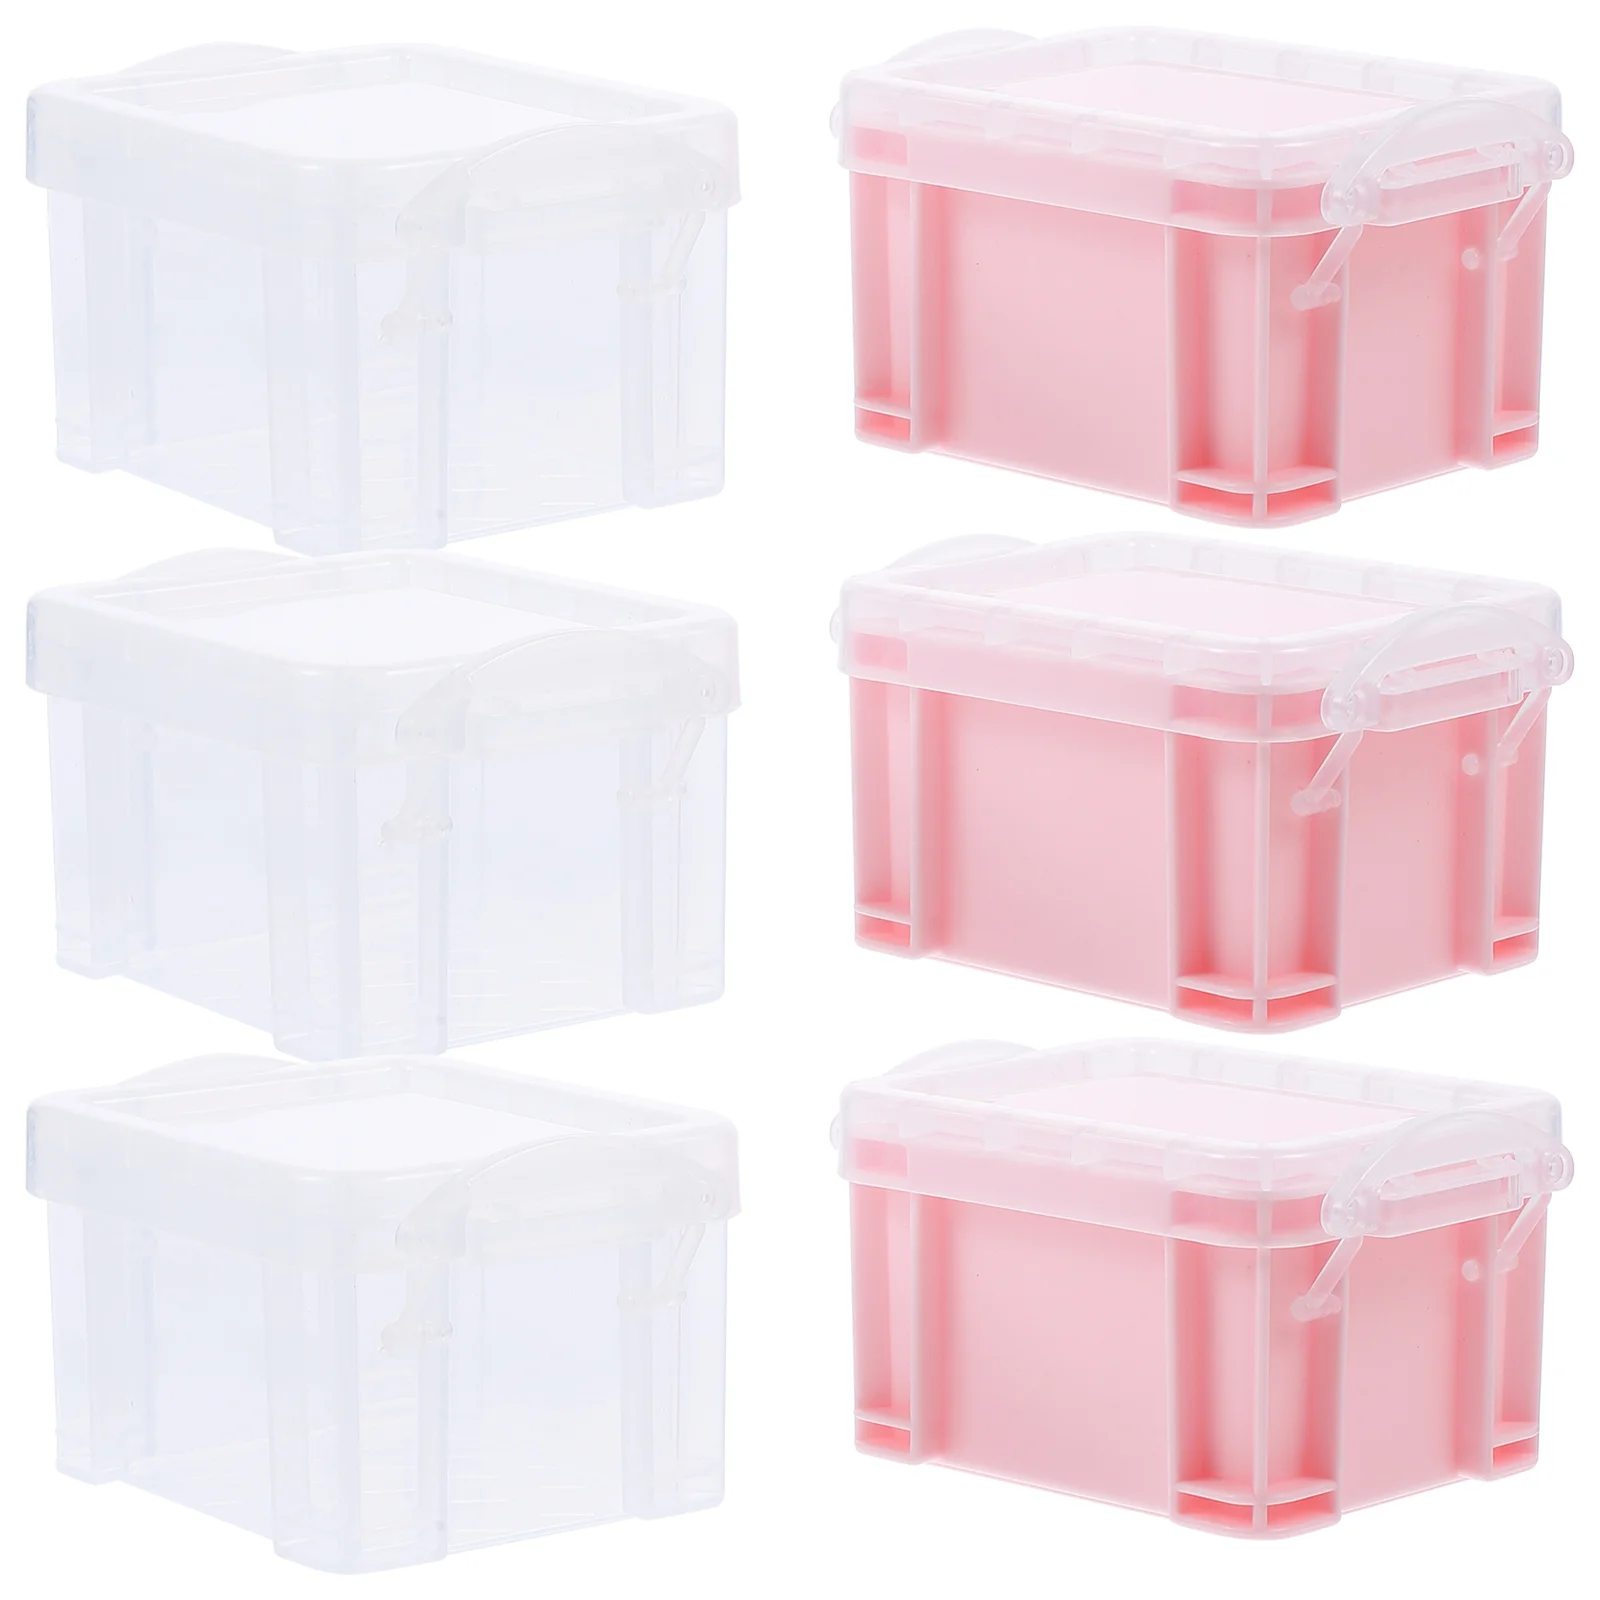 

Small Container Lid Beads Button Case Holder Mini Containers Lids Organizers Plastic Jars Storage Bins